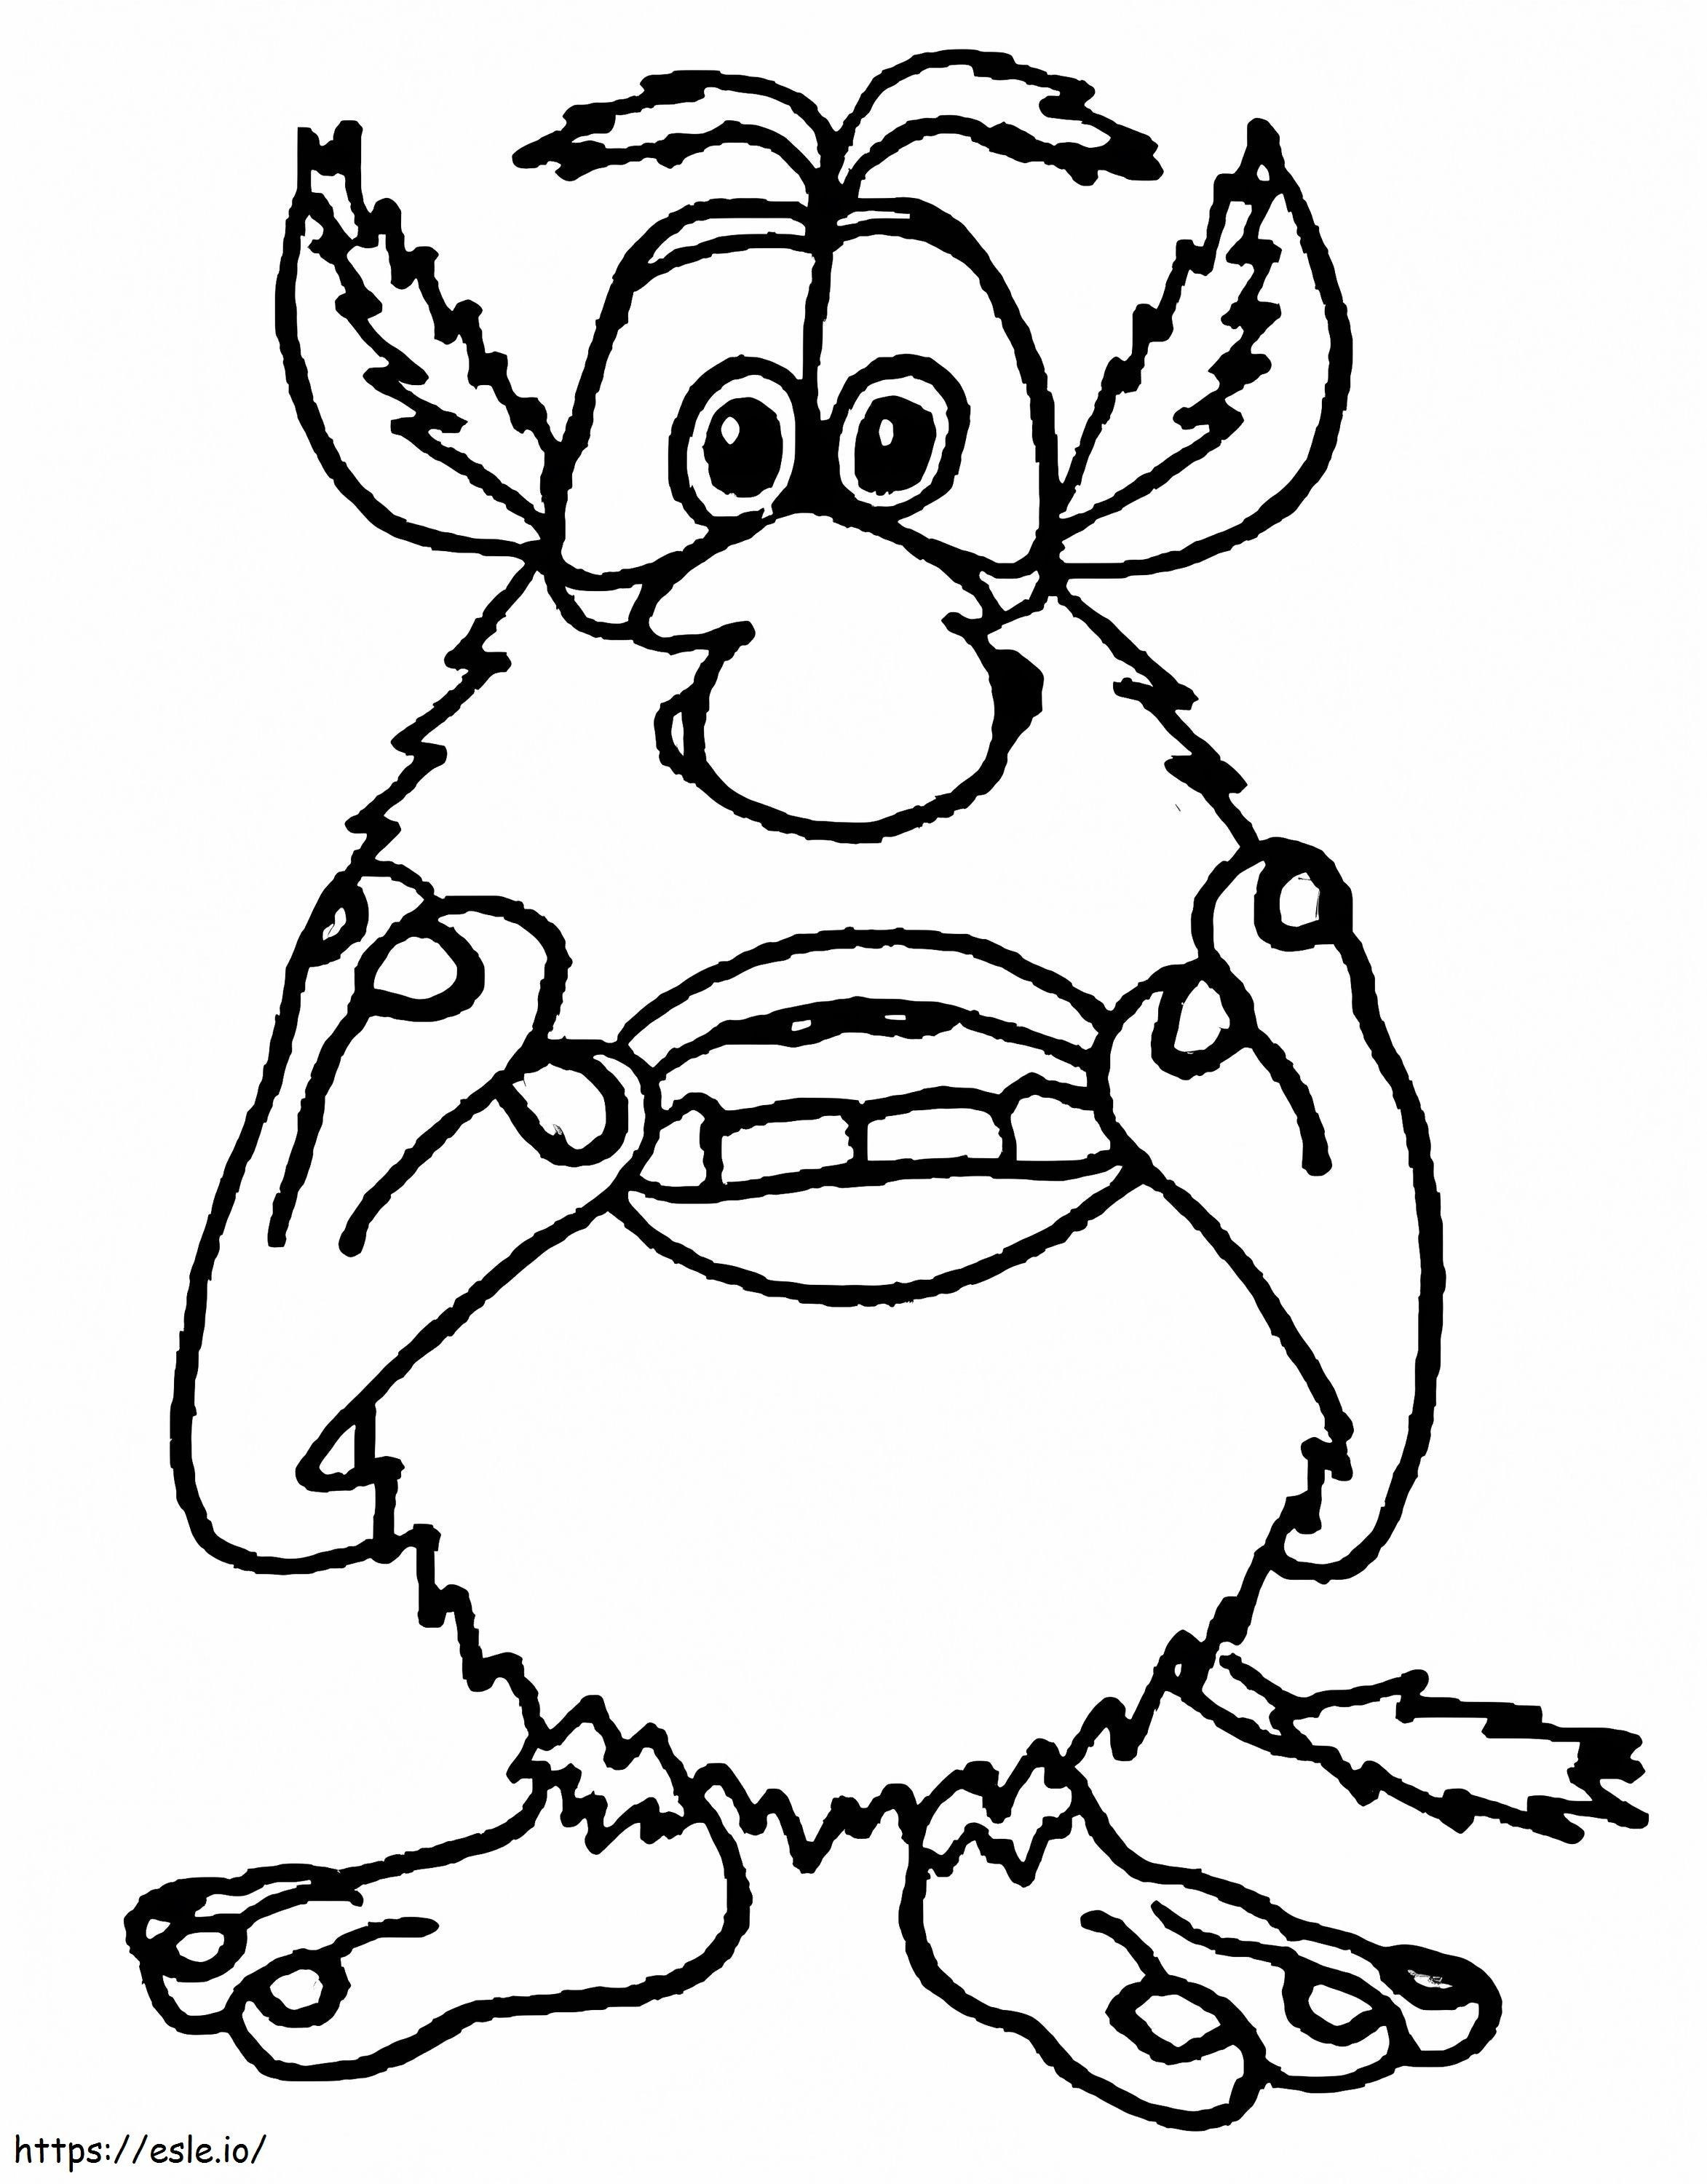 Booba Confused coloring page